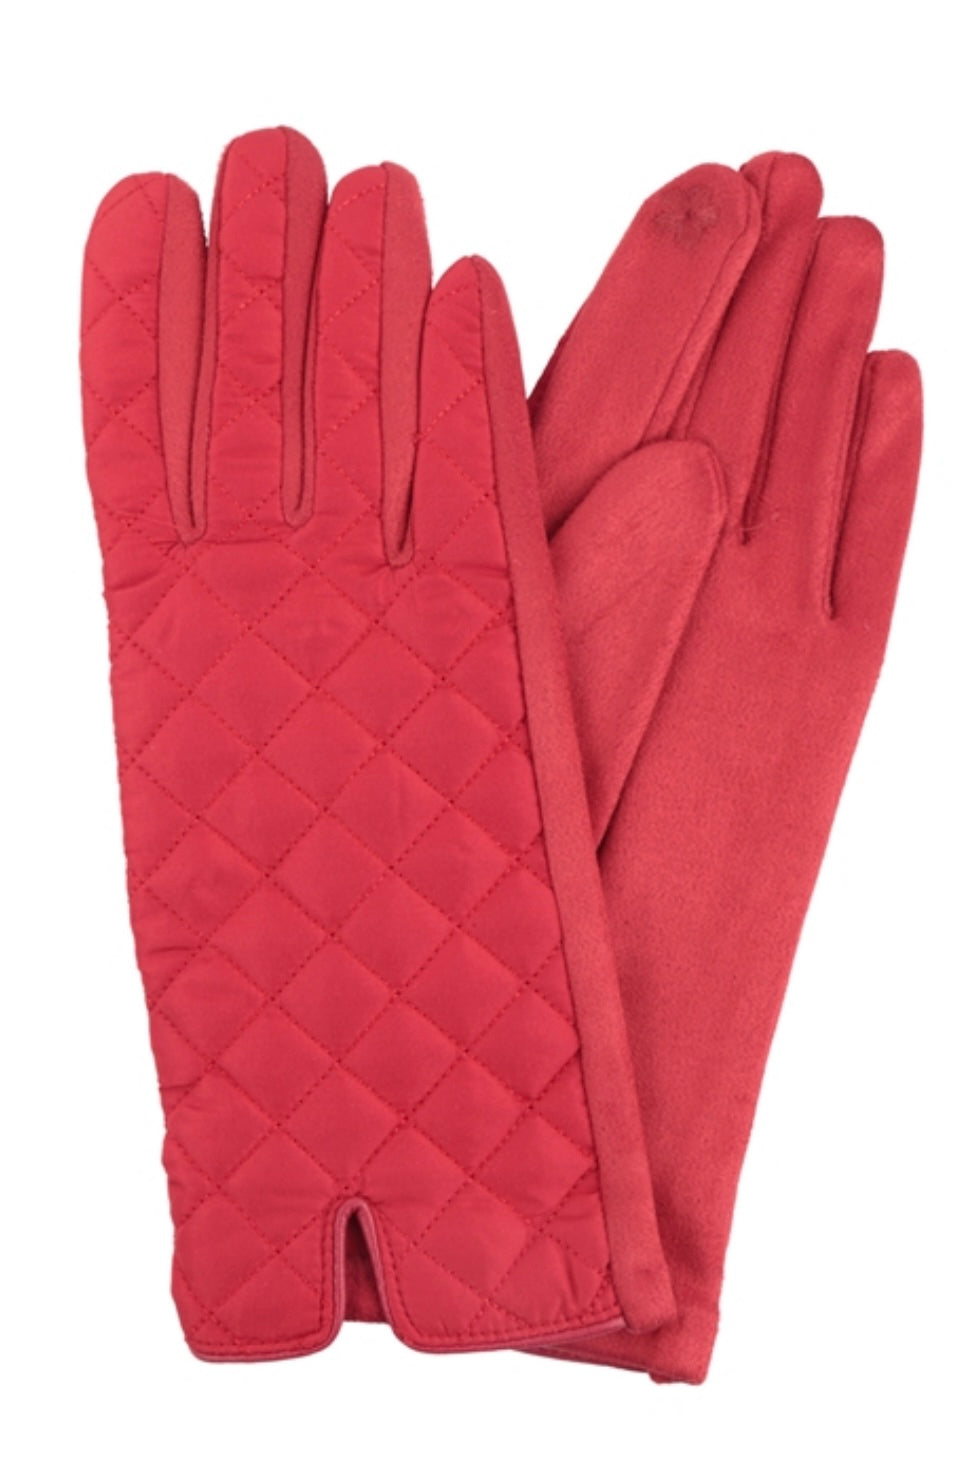 Smart touch gloves